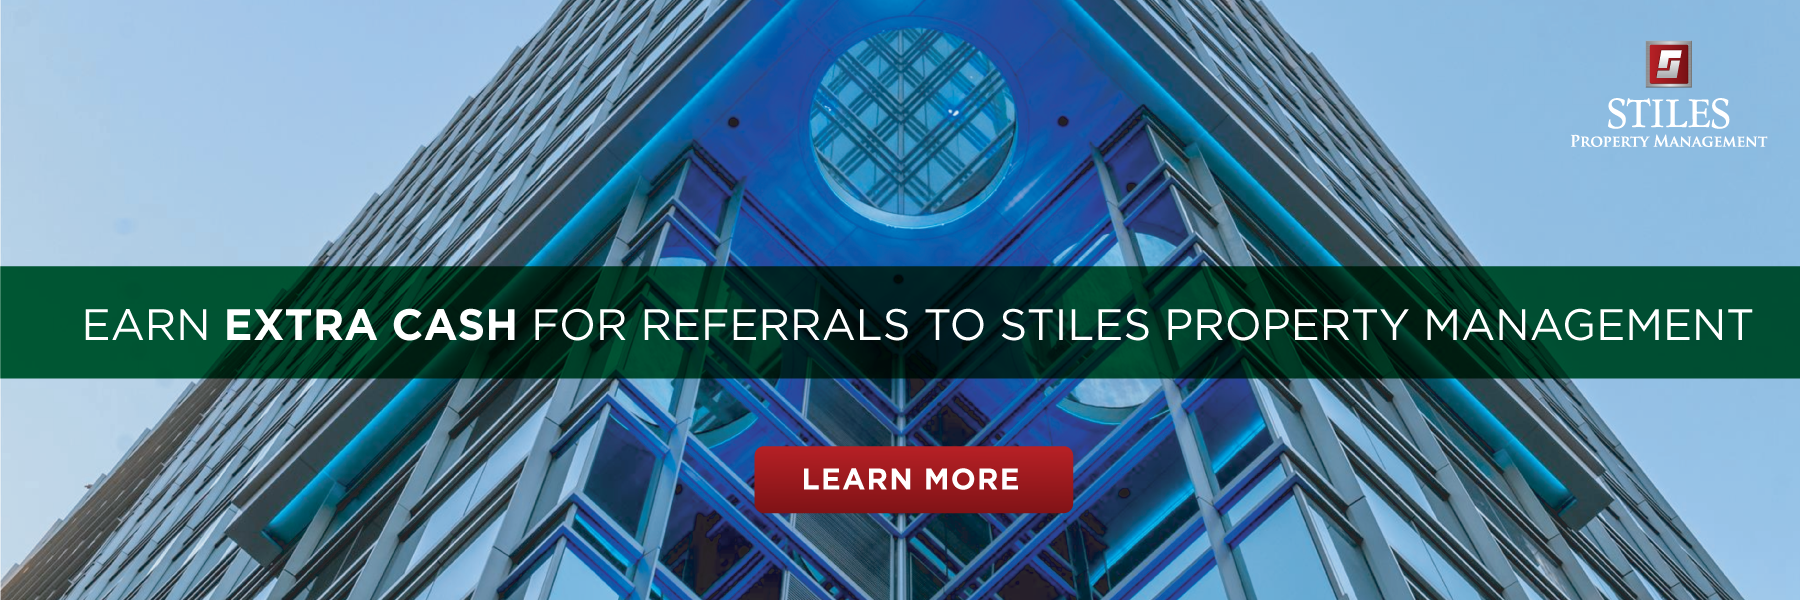 CRE-sources-Stiles Property Management Referral Ad